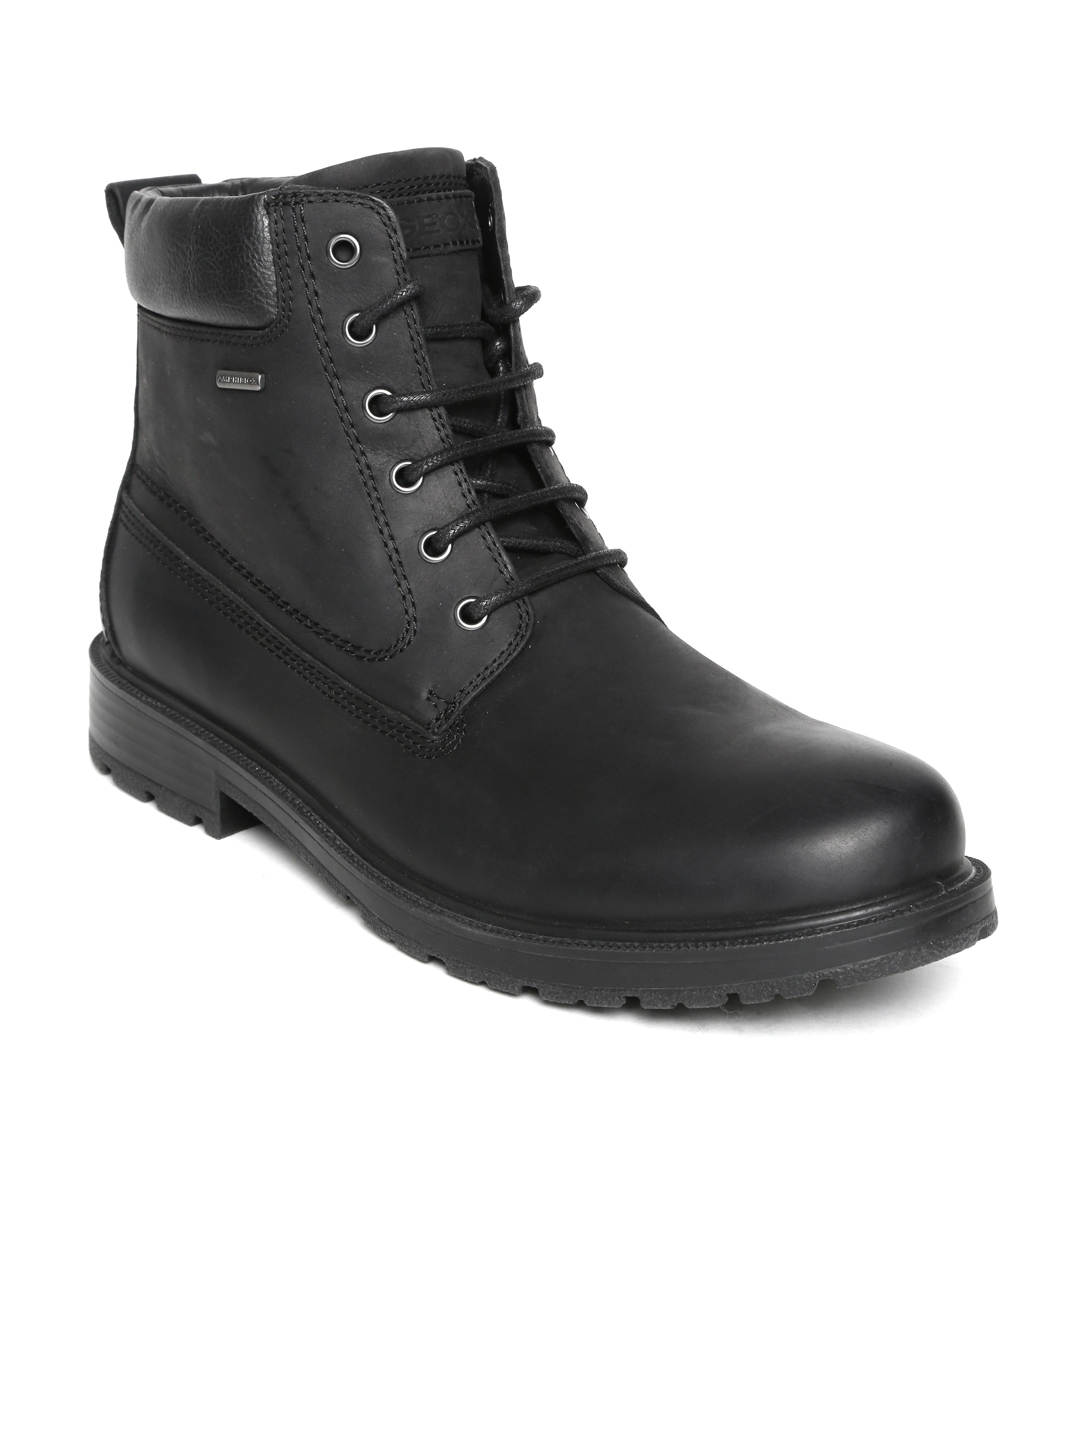 Plano vamos a hacerlo Sudamerica Buy Geox Men Black Solid Leather Mid Top Flat Boots - Casual Shoes for Men  9234585 | Myntra